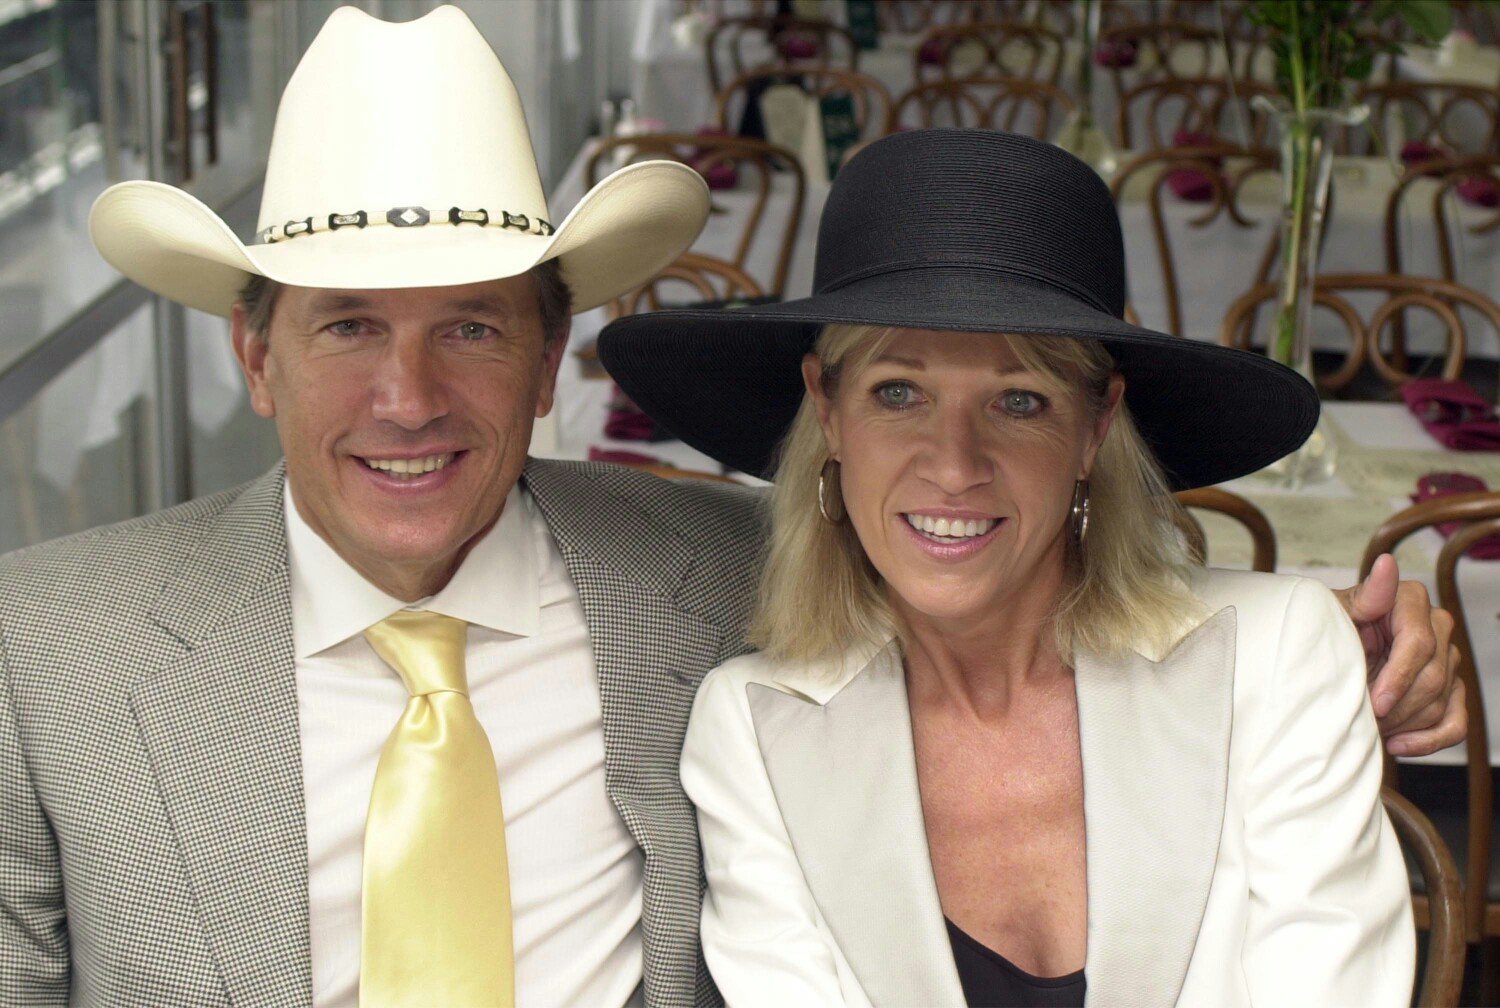 George Strait and his wife, Norma pictured at the 130th Running of the Kentucky Derby, 2004, Louisville, Kentucky. | Photo: Getty Images